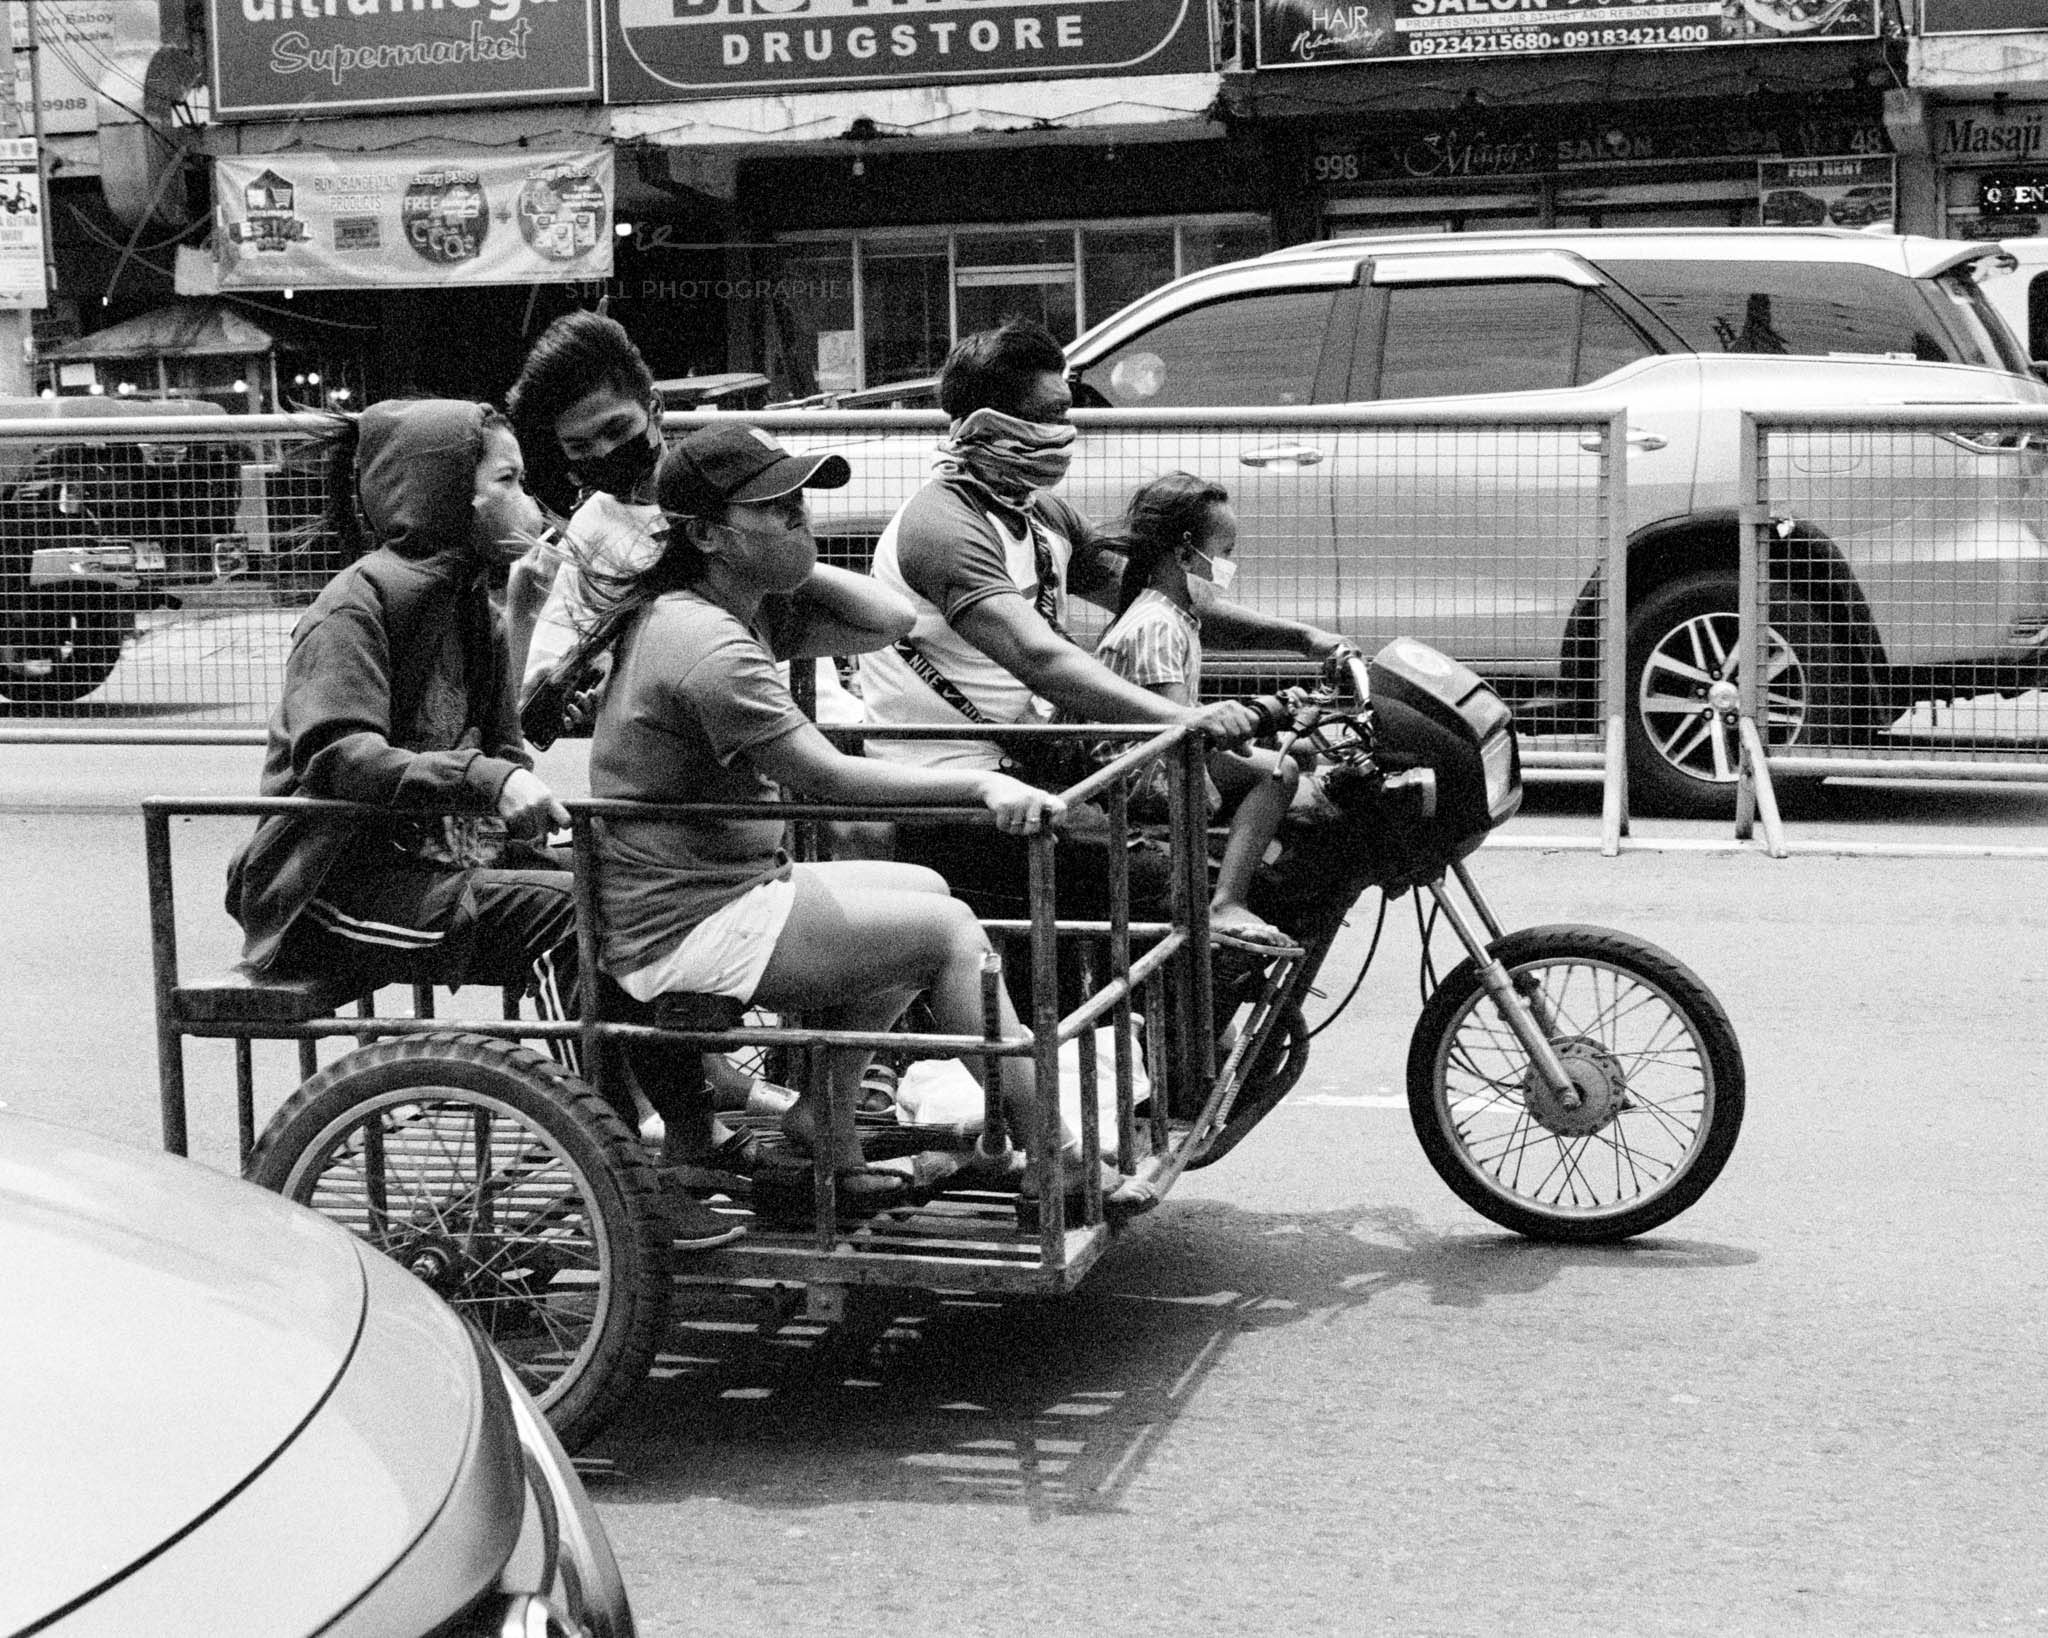 Multi-passenger motorcycle sidecar on busy city street, black and white photo.